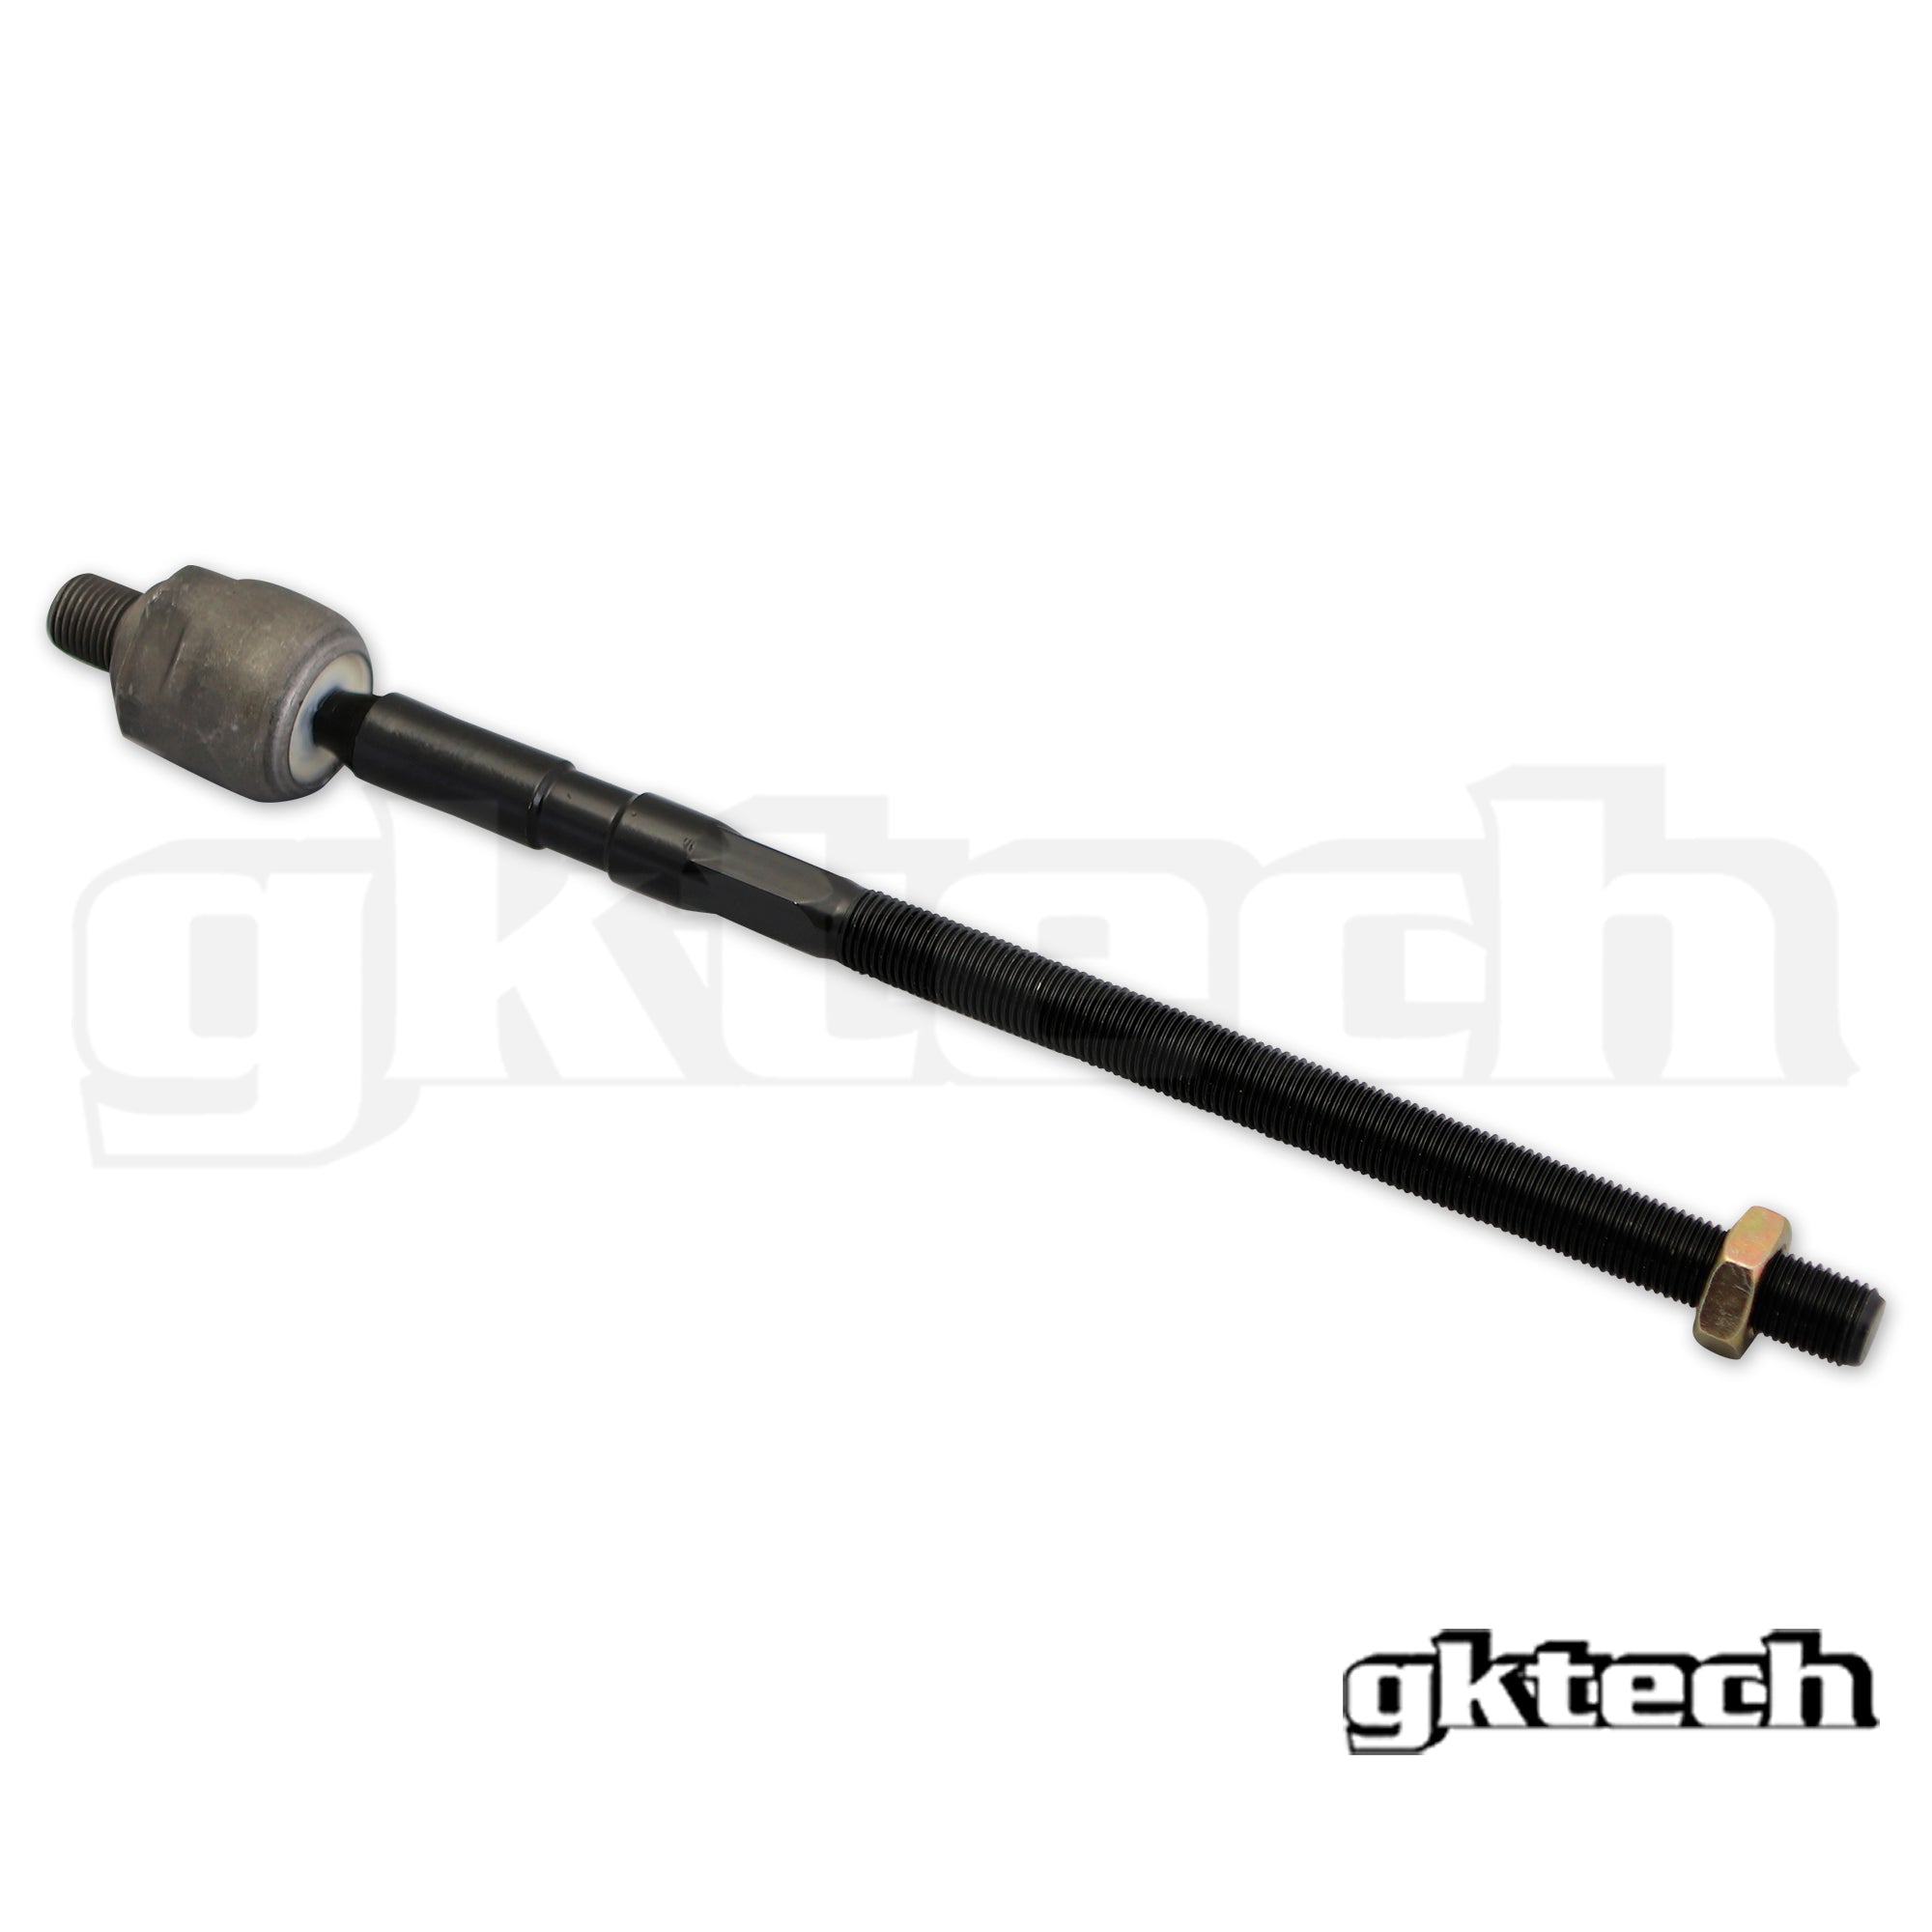 FR-S / GR86 / BRZ Super Lock replacement inner tie rod - SOLD INDIVIDUALLY